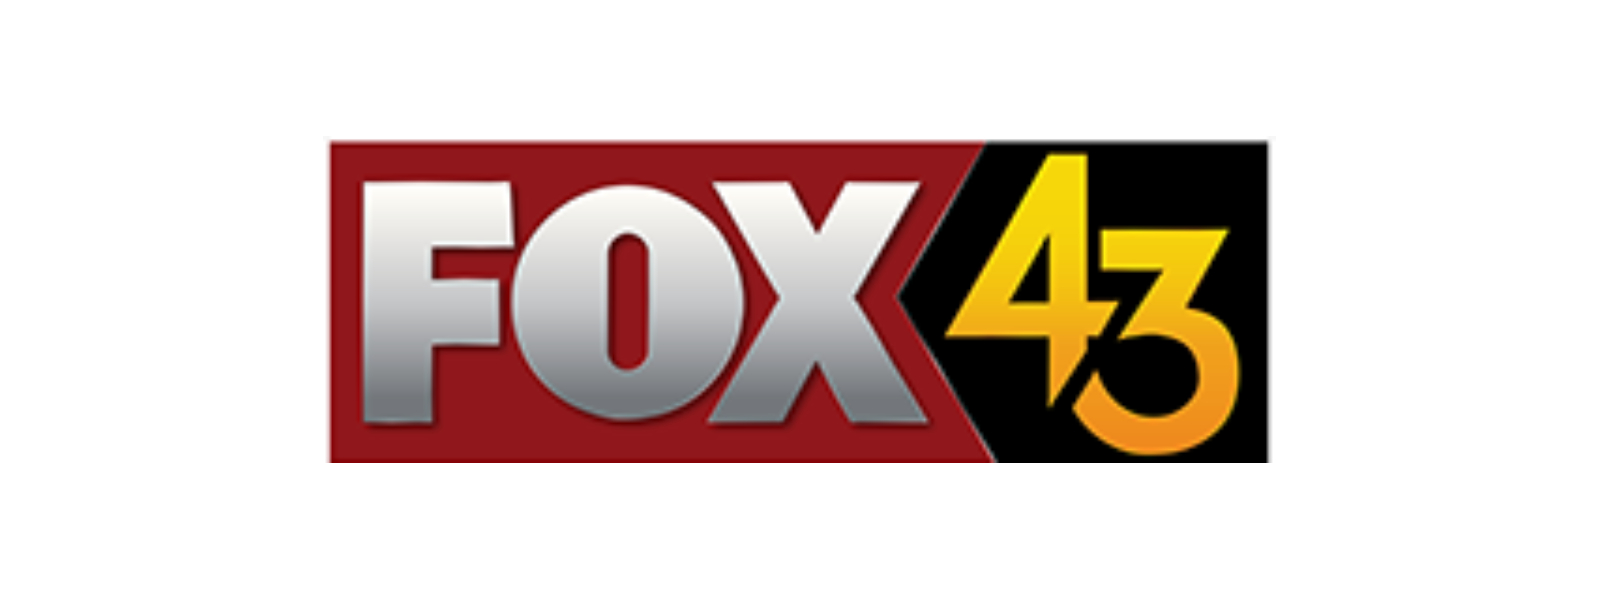 Available Mover In Fox 43